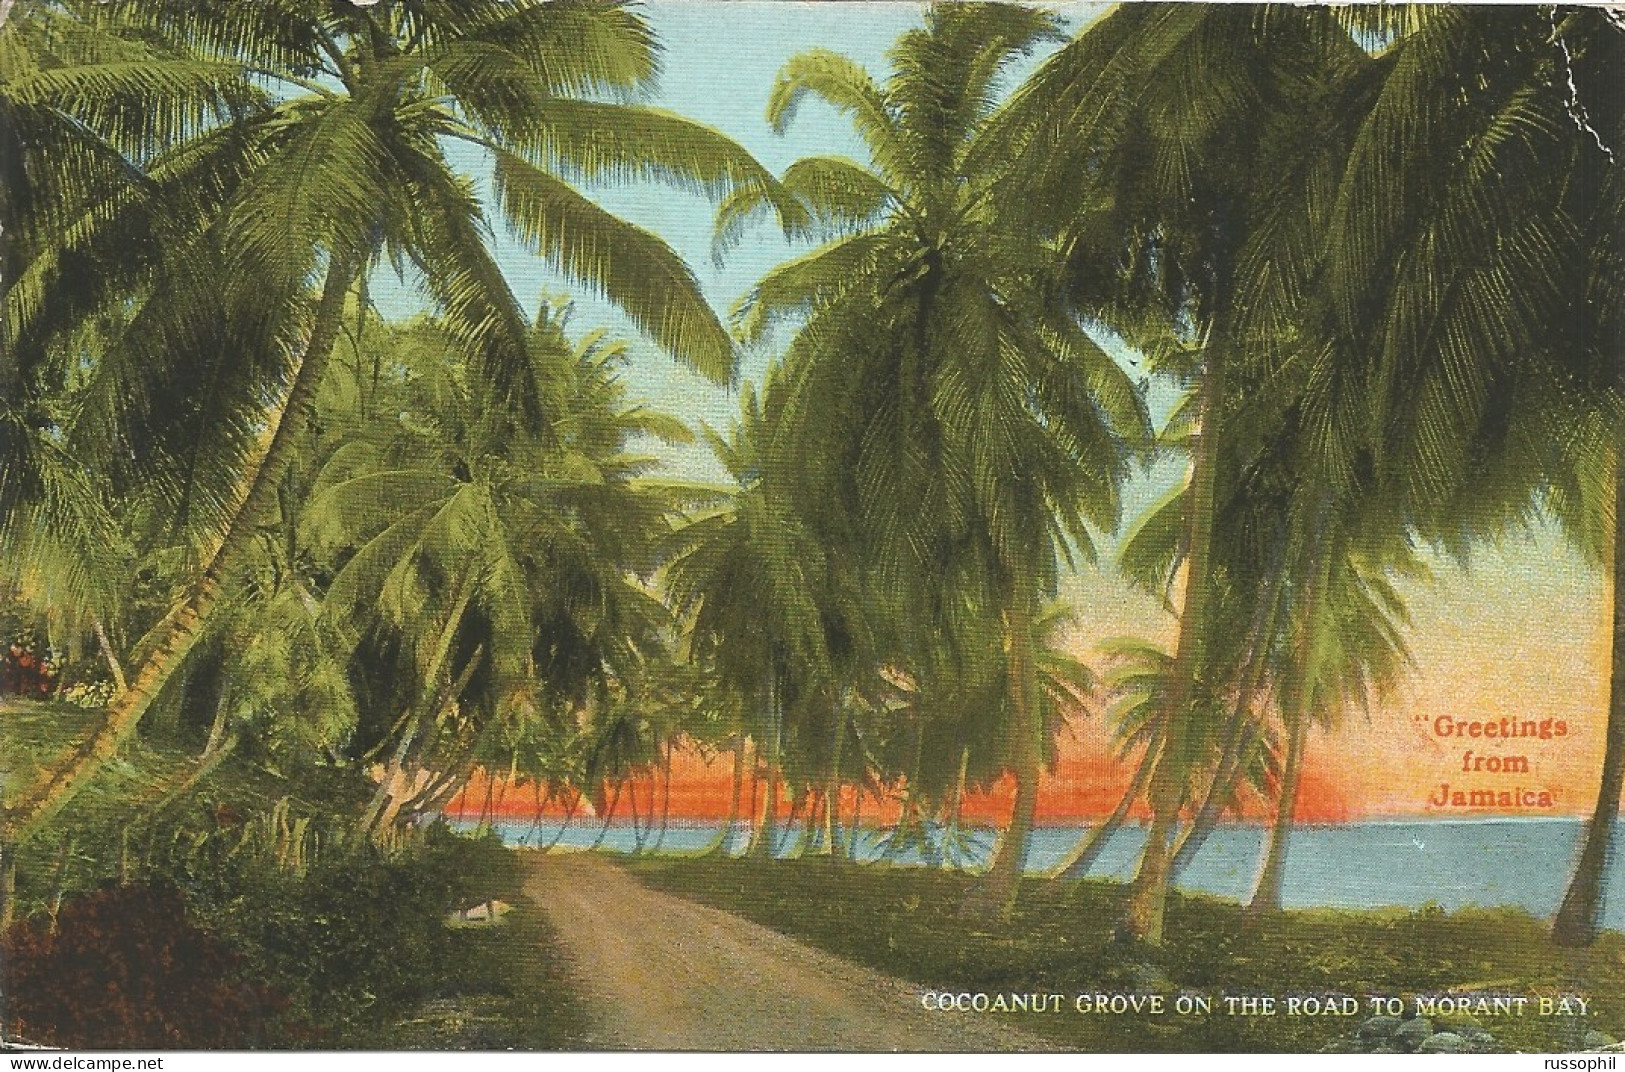 JAMAICA - FRANKED PC FROM KINGSTON TO SWITZERLAND BY THE KINGSTON BRANCH OF RUM COMPANY LIMITED -  1932 - Jamaica (...-1961)